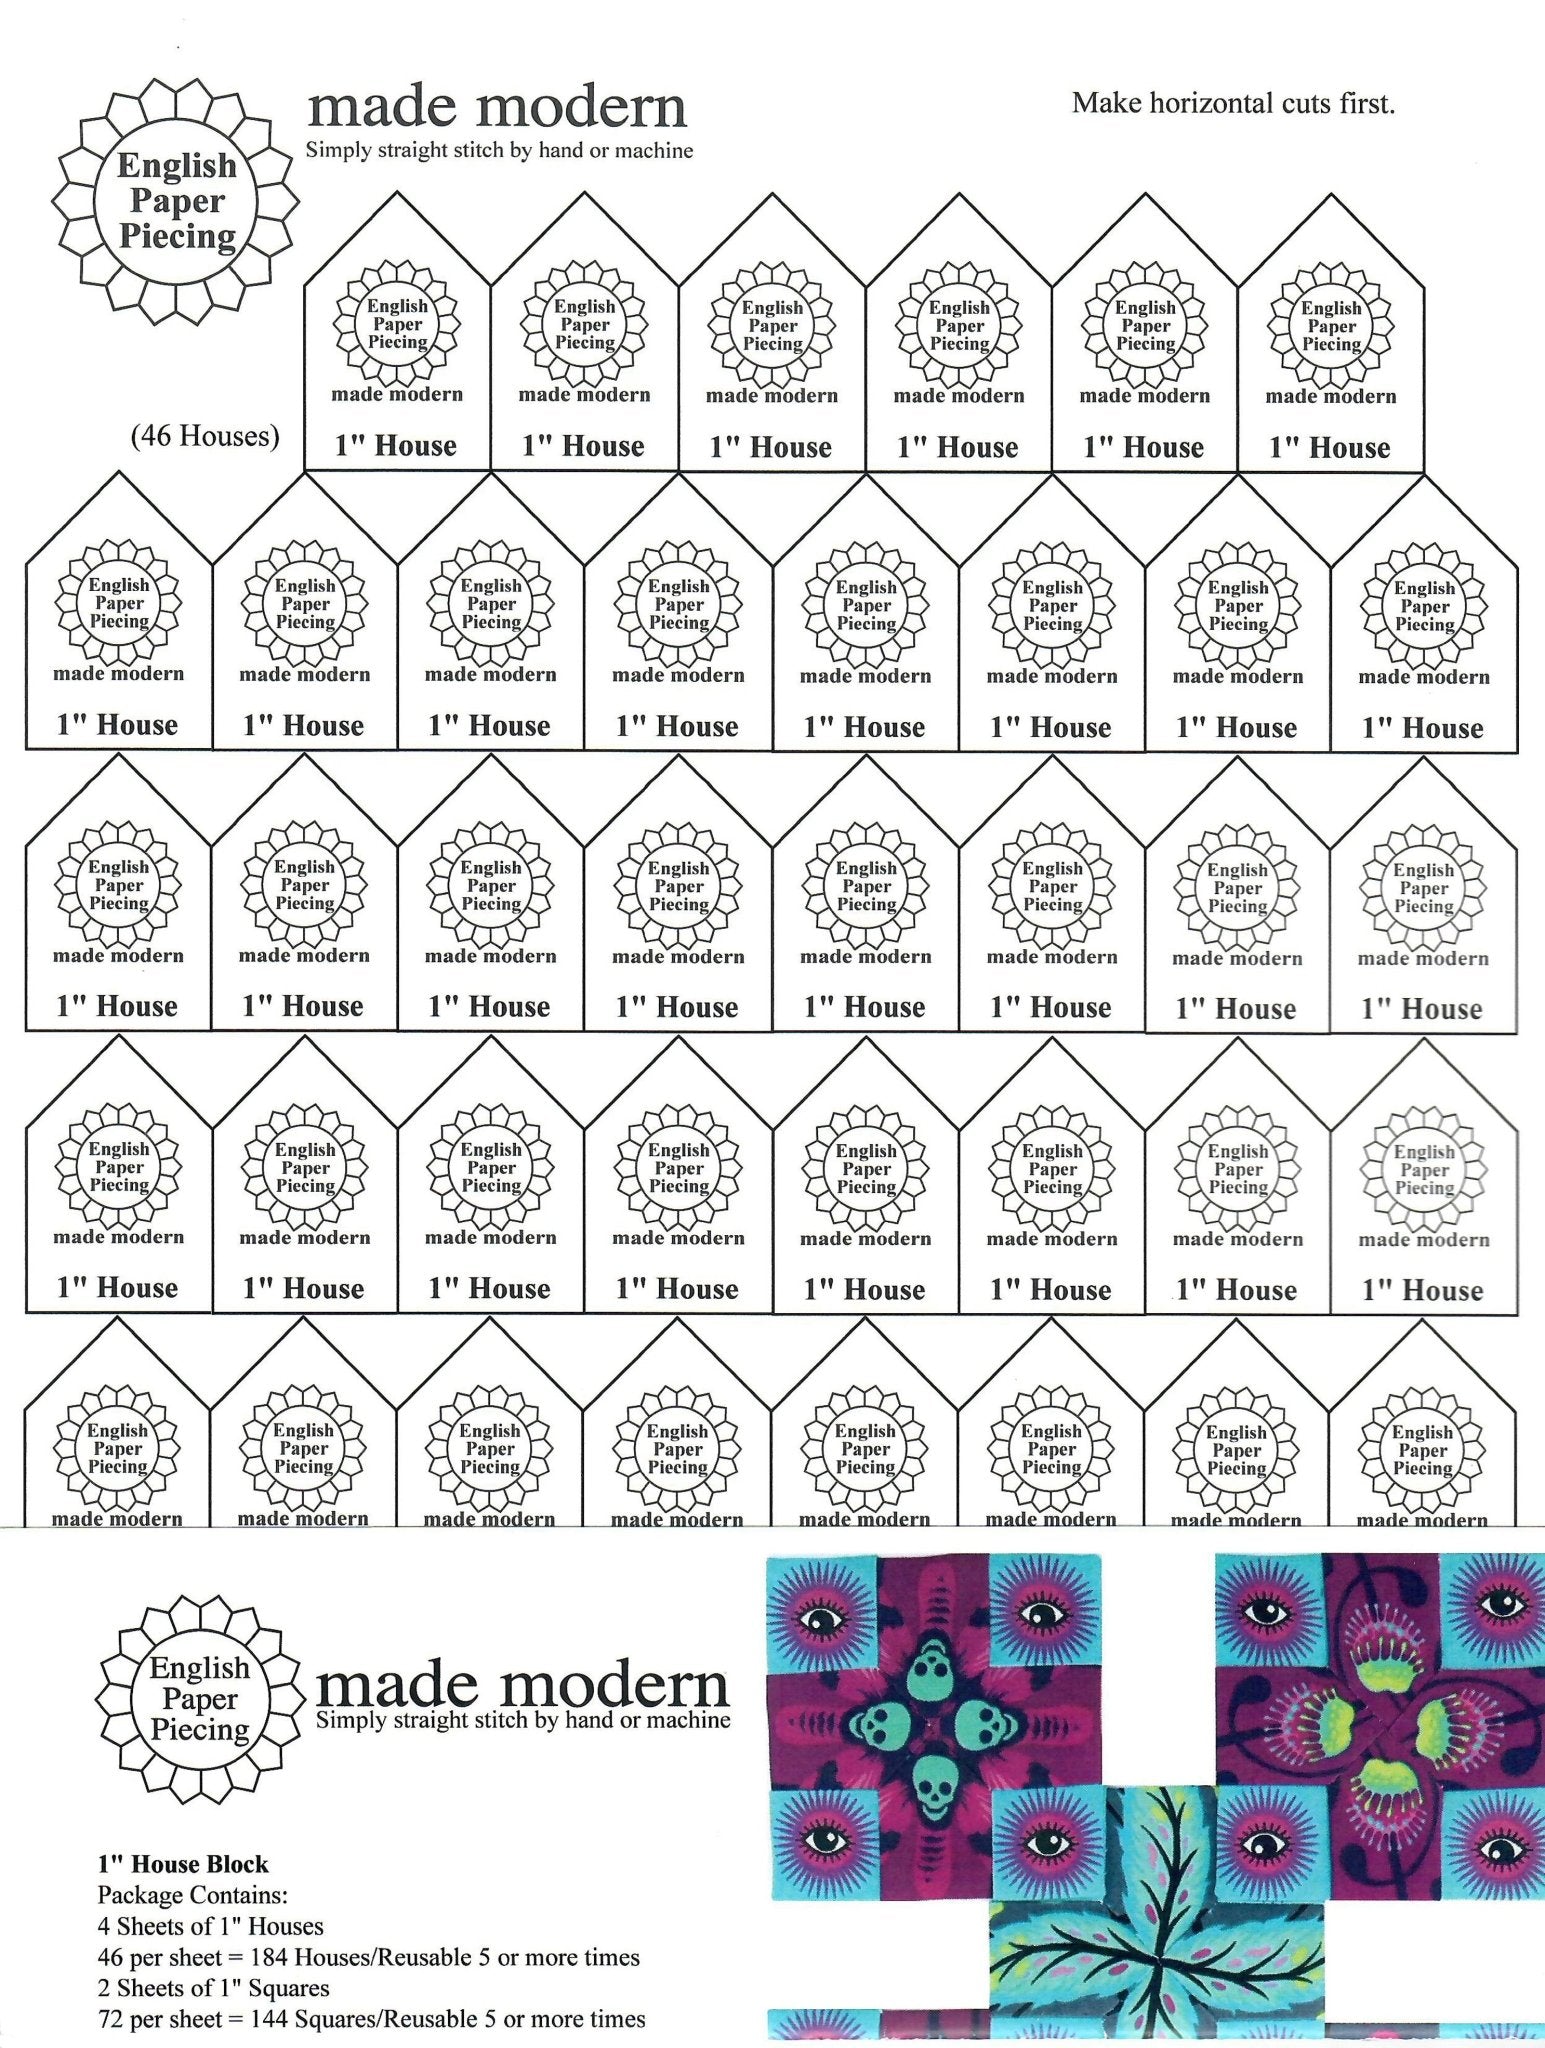 English Paper Piecing Made Modern | Templates for 1" Houses and 1" Squares - Sewforever